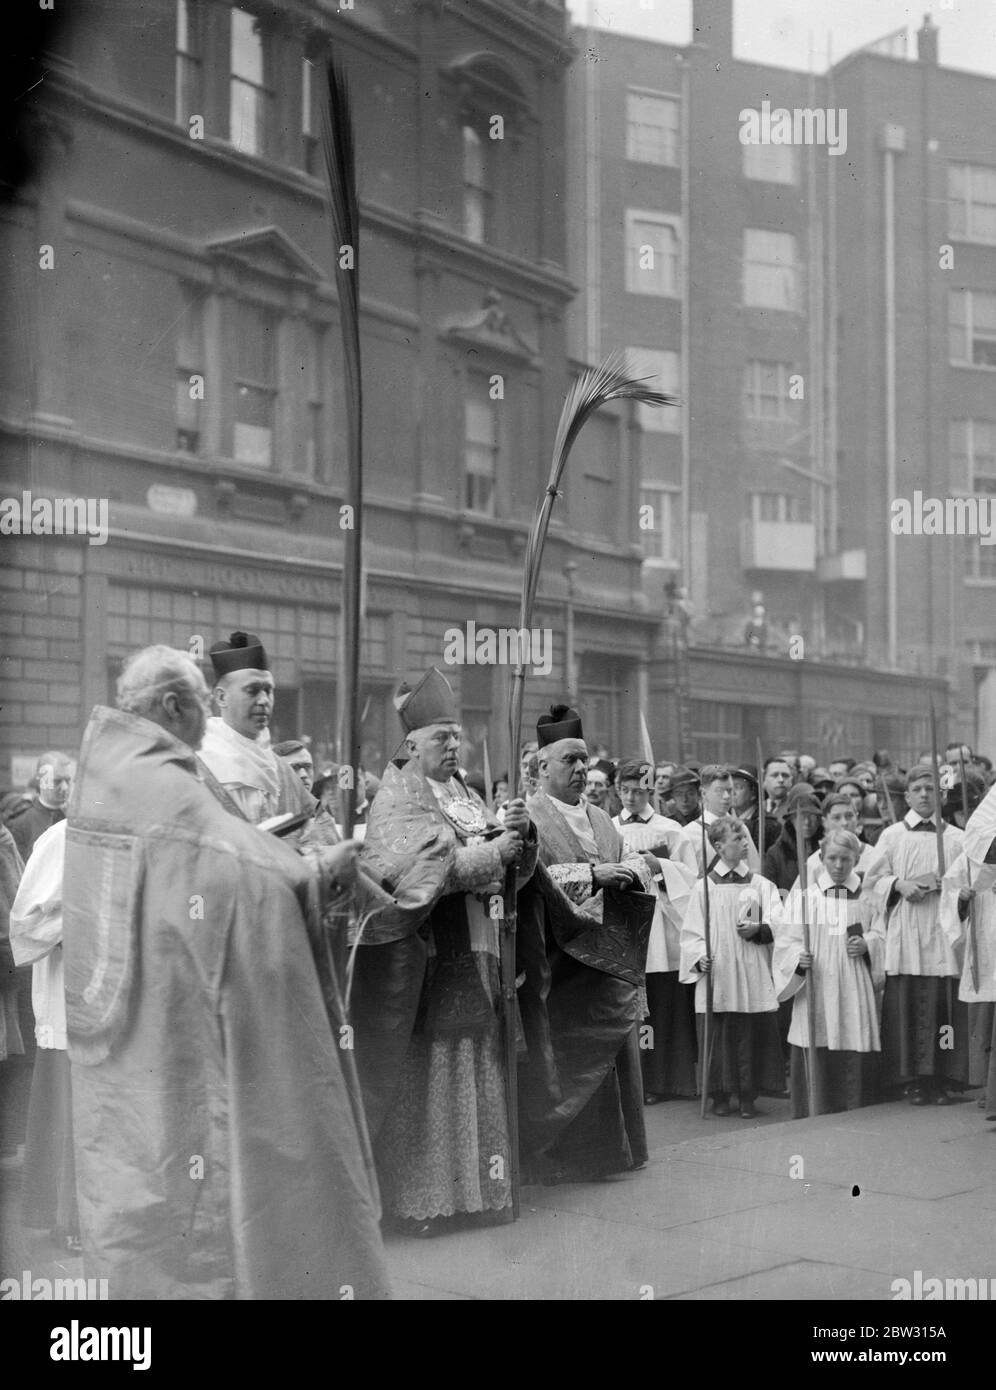 Cardinal Bourne heads Palm Sunday procession at Westminster Cathedral . Cardinal Bourne , head of the Roman Catholic church in England , headed the Palm Sunday procession to Westminster Cathedral , London . Cardinal Bourne blessing the palms at the ceremony outside the Cathedral . 20 March 1932 Stock Photo